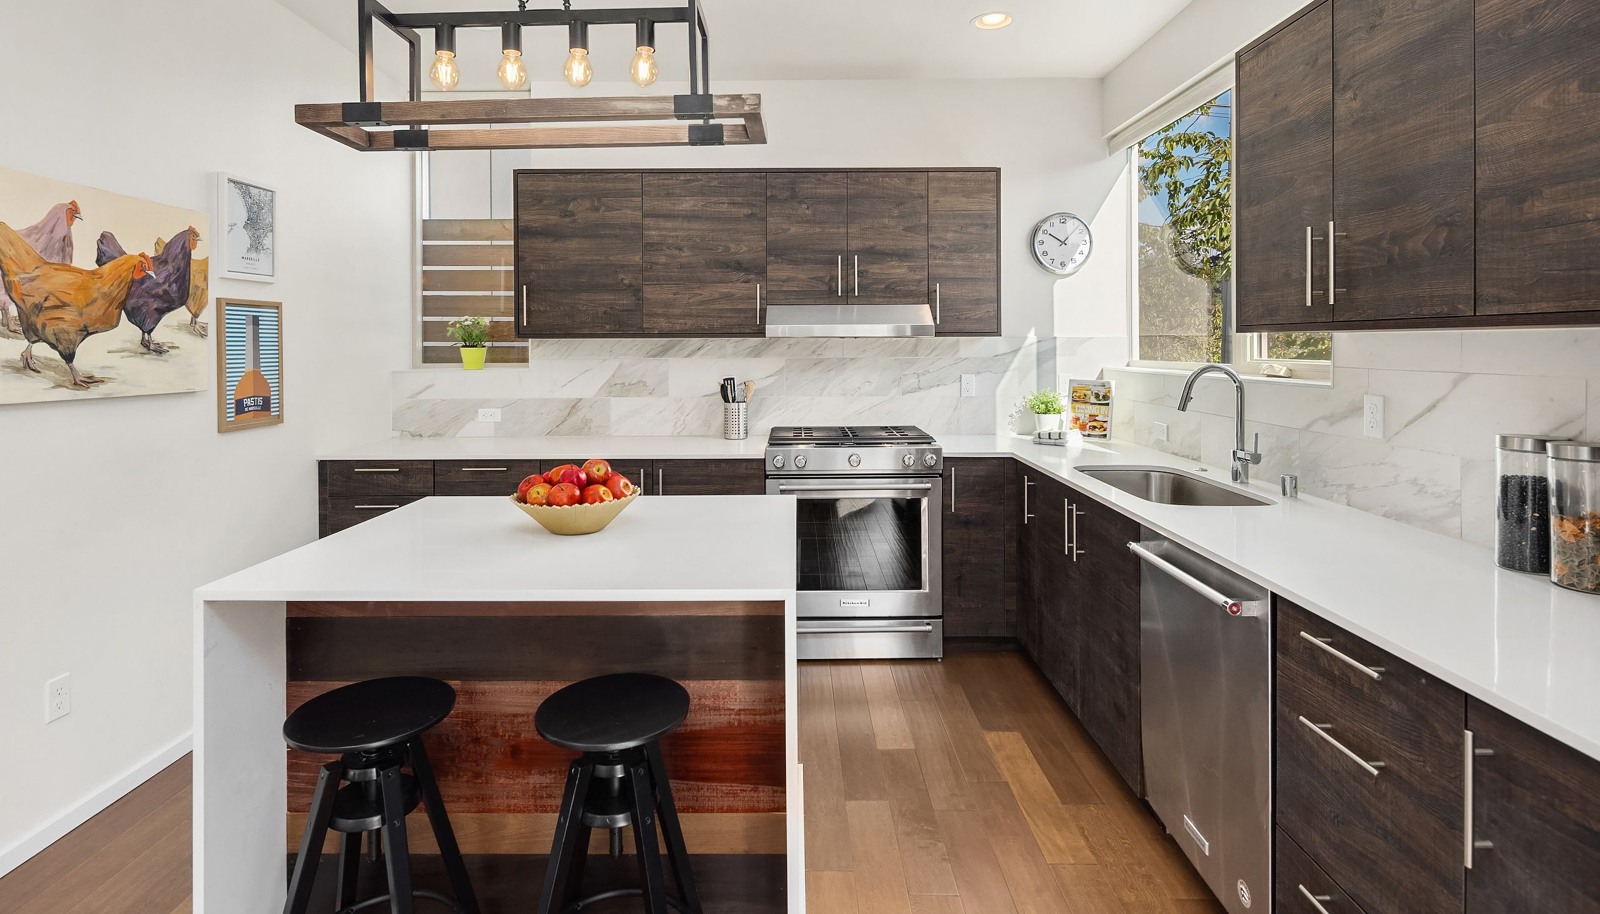 What's not to love about this LUXE kitchen. Three years young and gently used. Note the privacy from neighbors to the north as well as neighbors passing by.